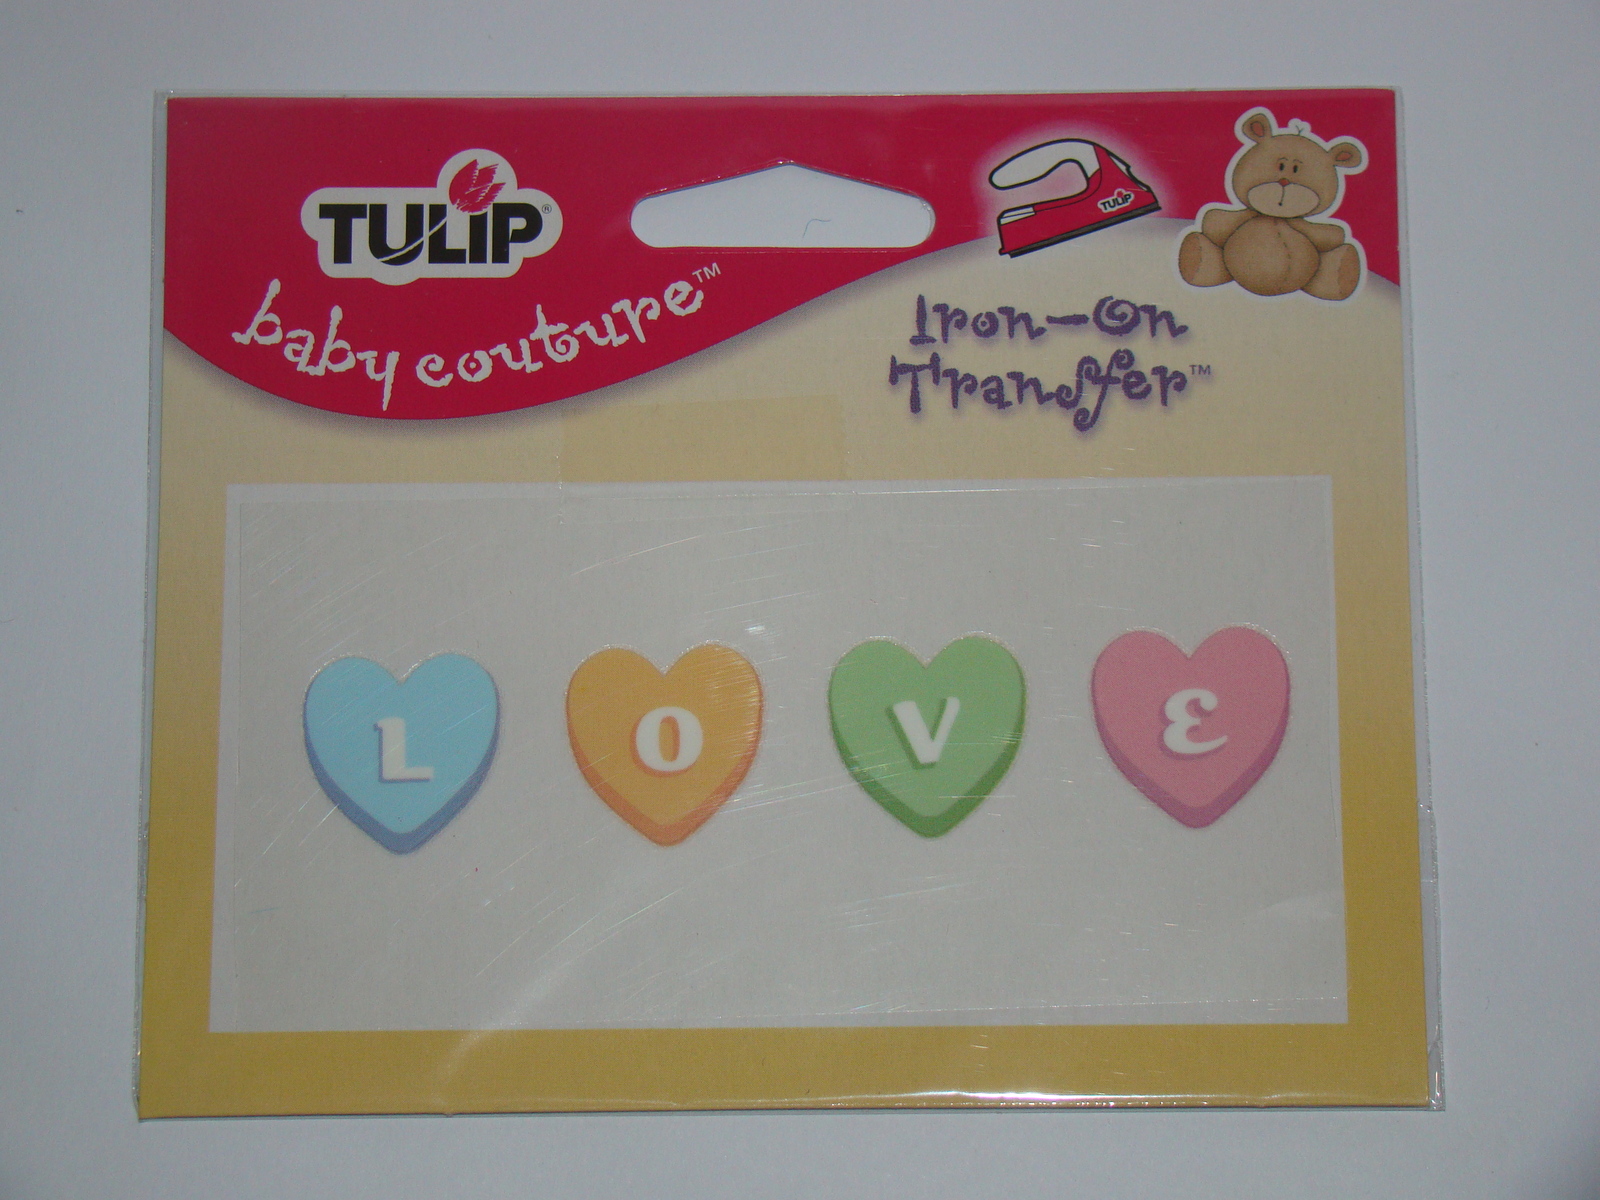 TULIP - baby couture Iron-on Applique - Candy Love - $8.00